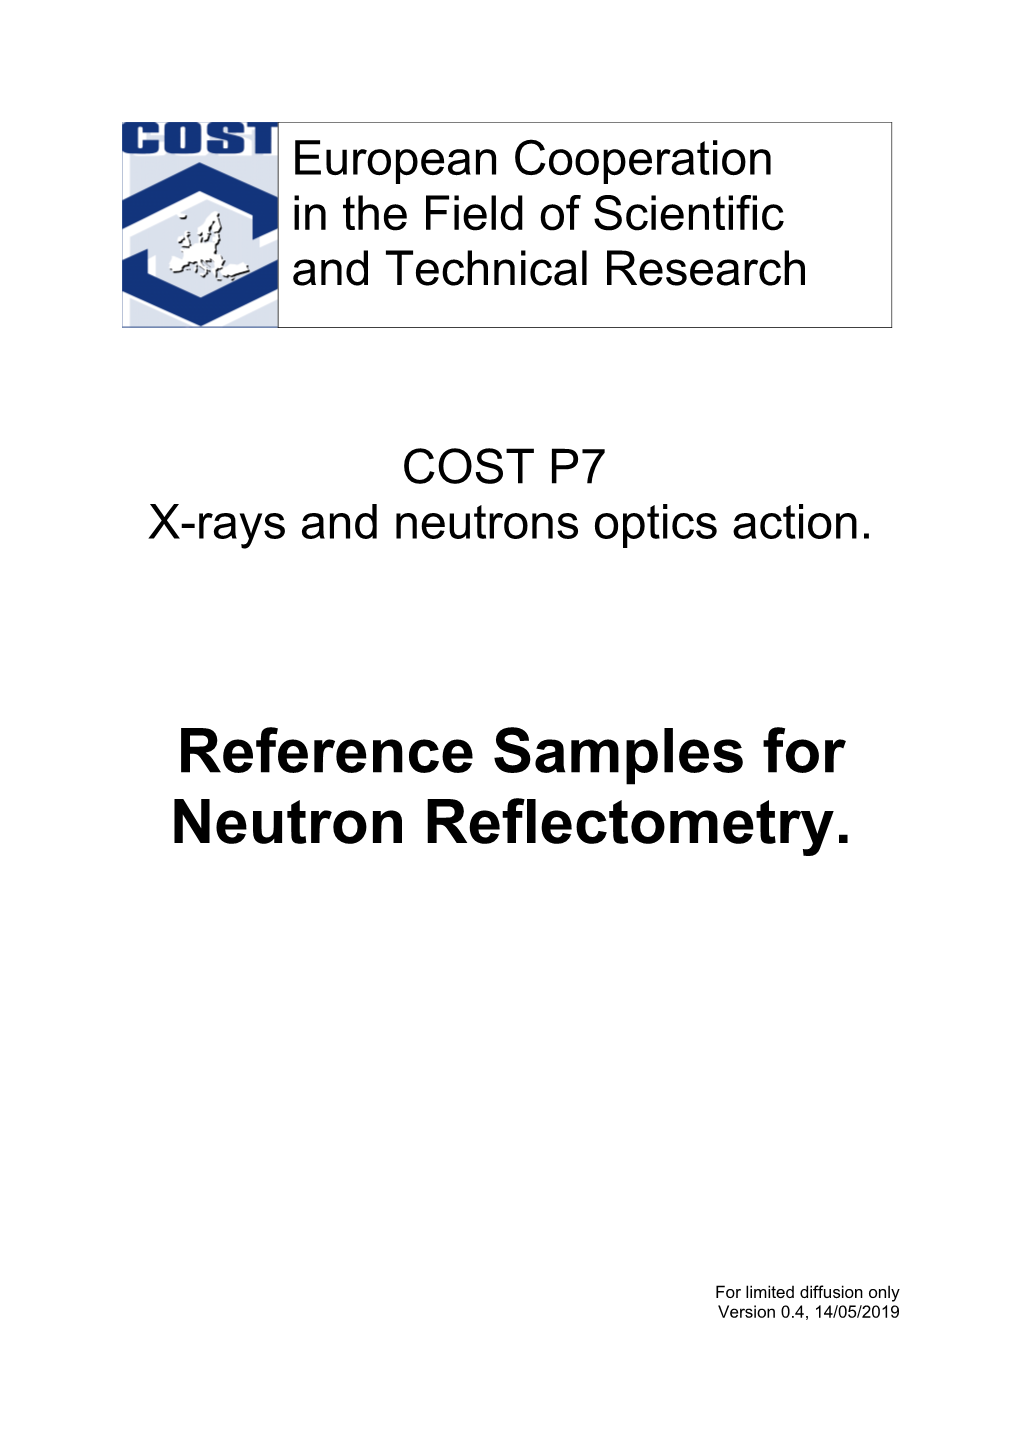 Reference Samples for Neutron Reflectometry